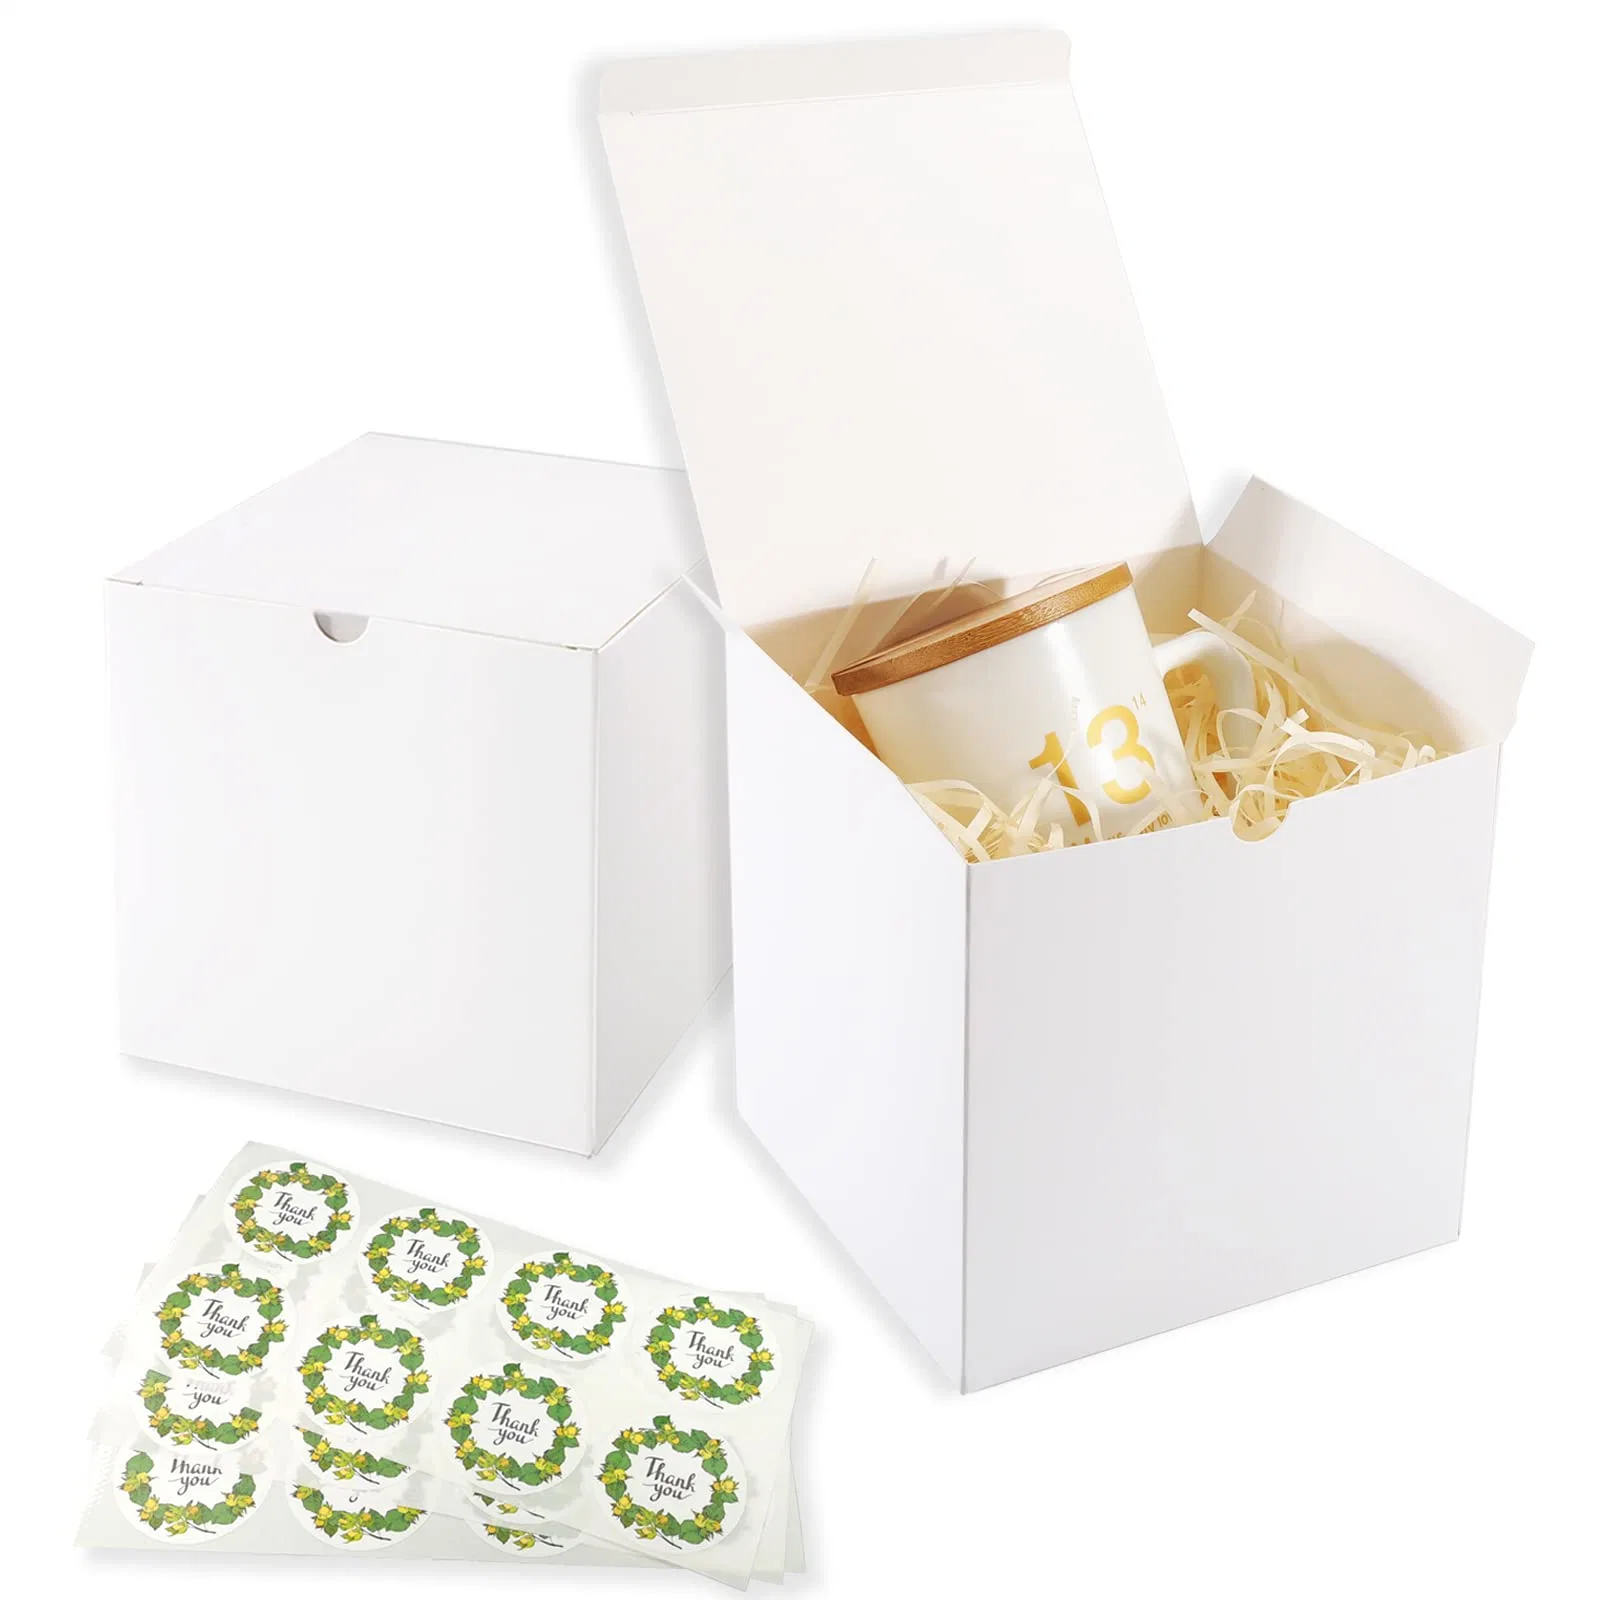 White Gift Boxes 5X5X5 Inch Small Gift Boxes with Lids for Party Gift Boxes, Ornament Boxes, Christmas Gift Boxes, Wedding Boxes Easy to Assemble Gift Box